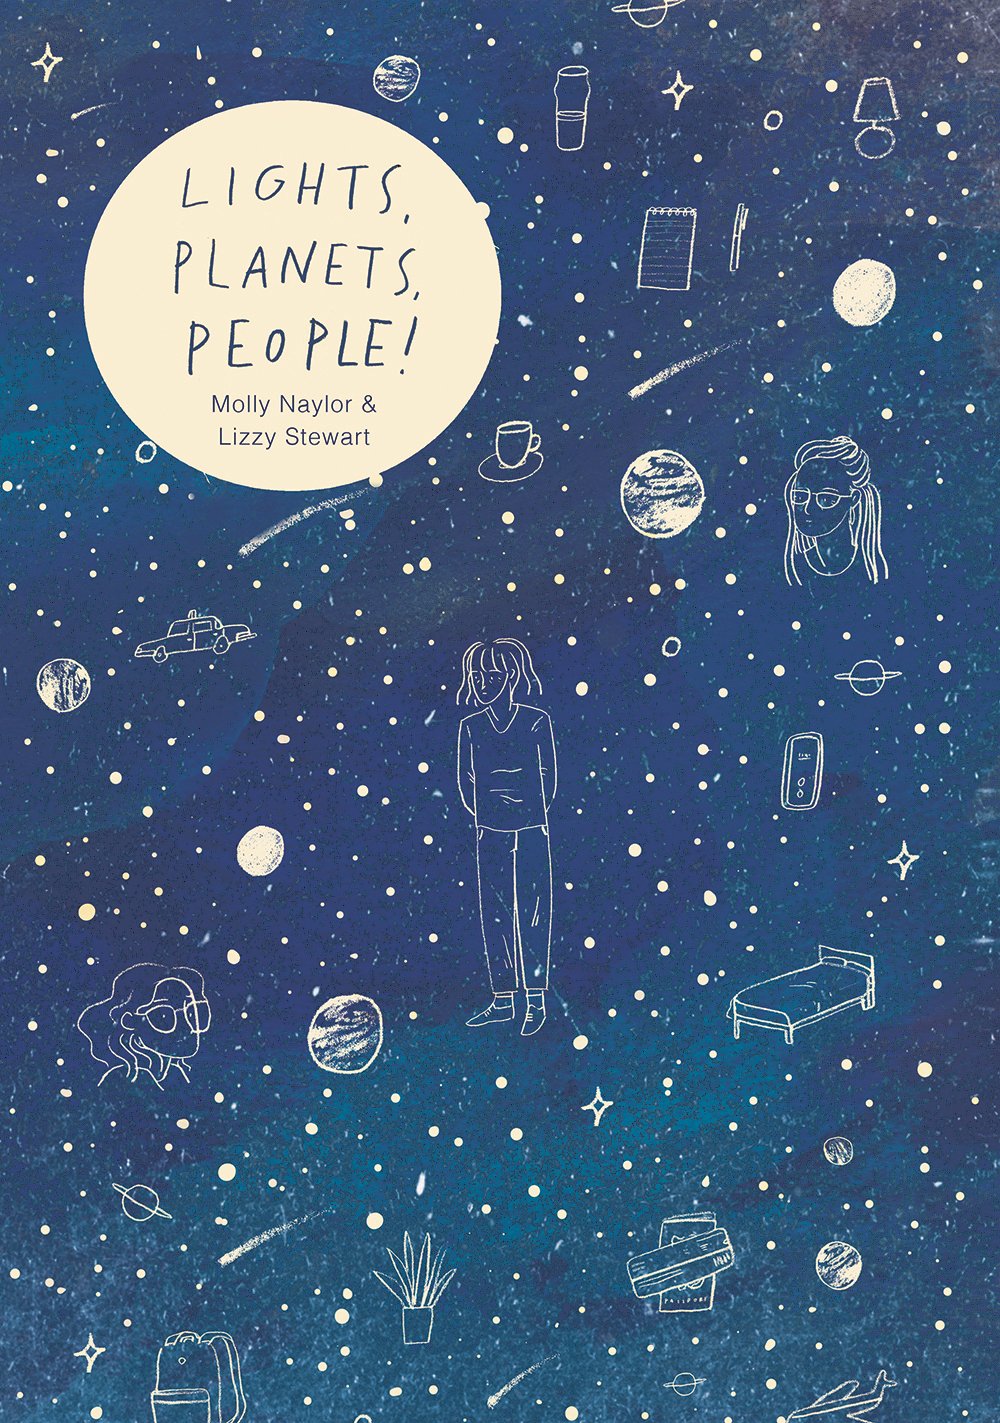 Lights, Planets, People! by Molly Naylor & Lizzy Stewart